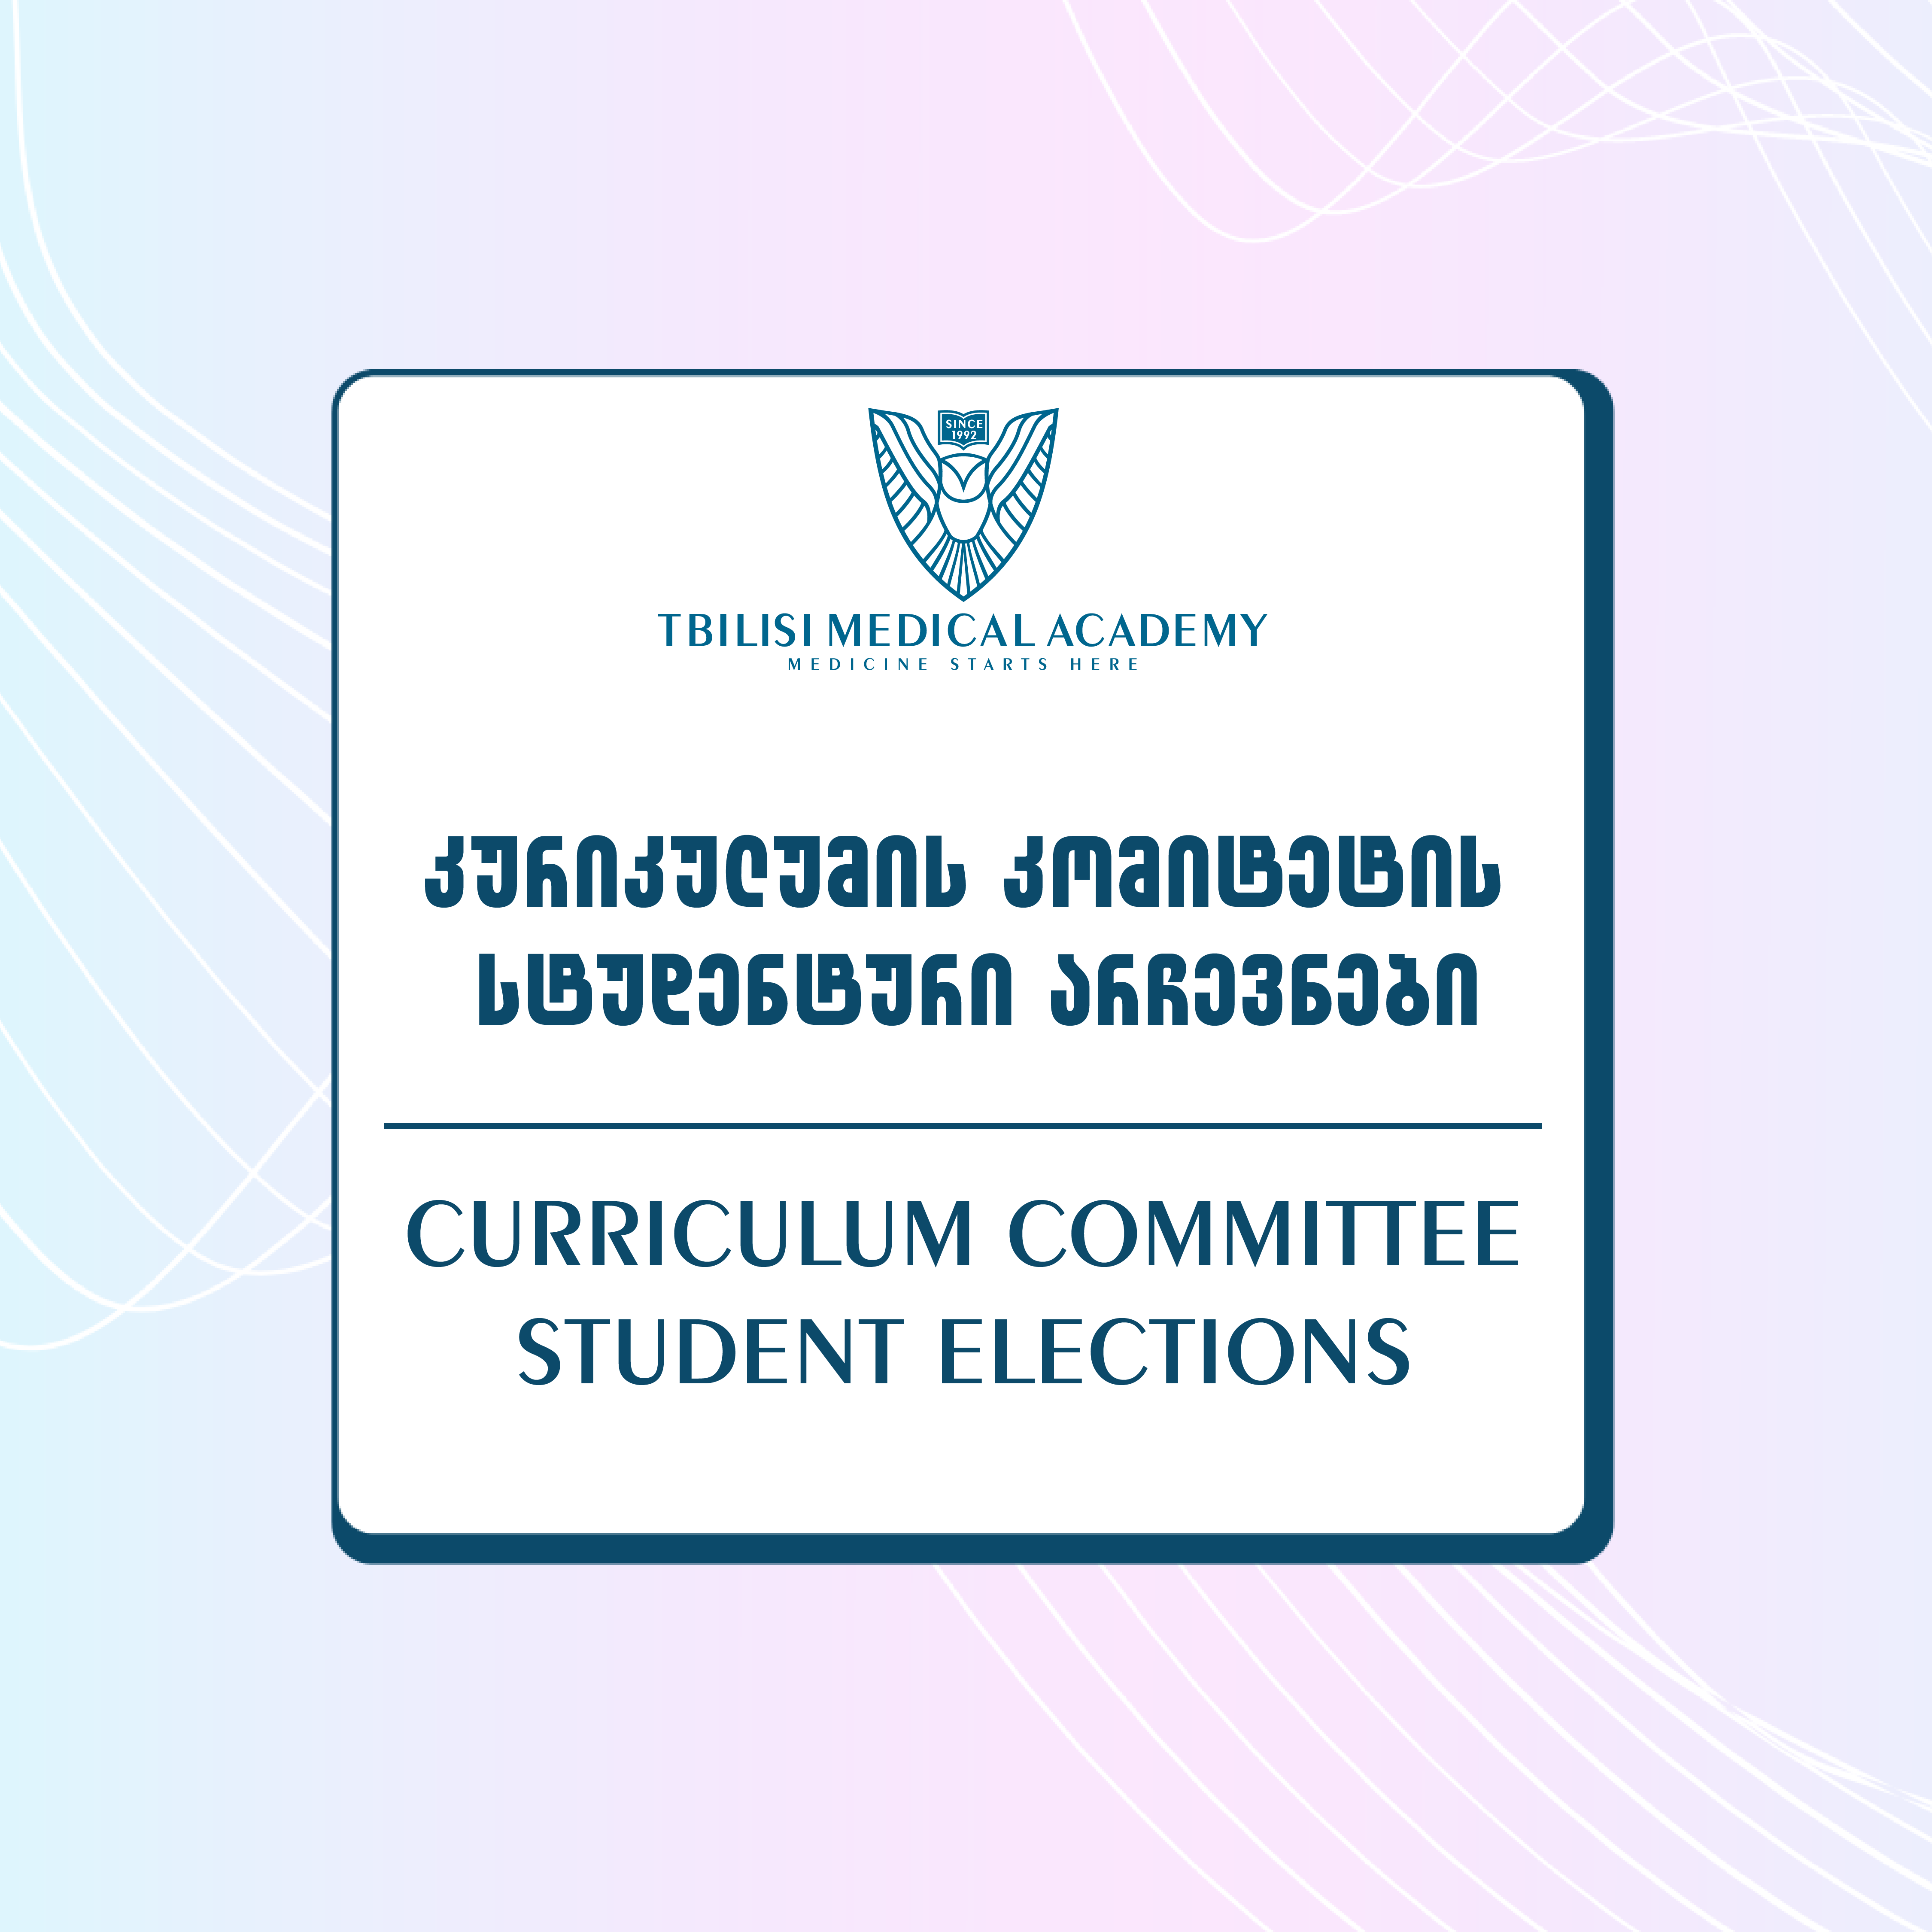  Elections of Student Representatives to the Curriculum Committee